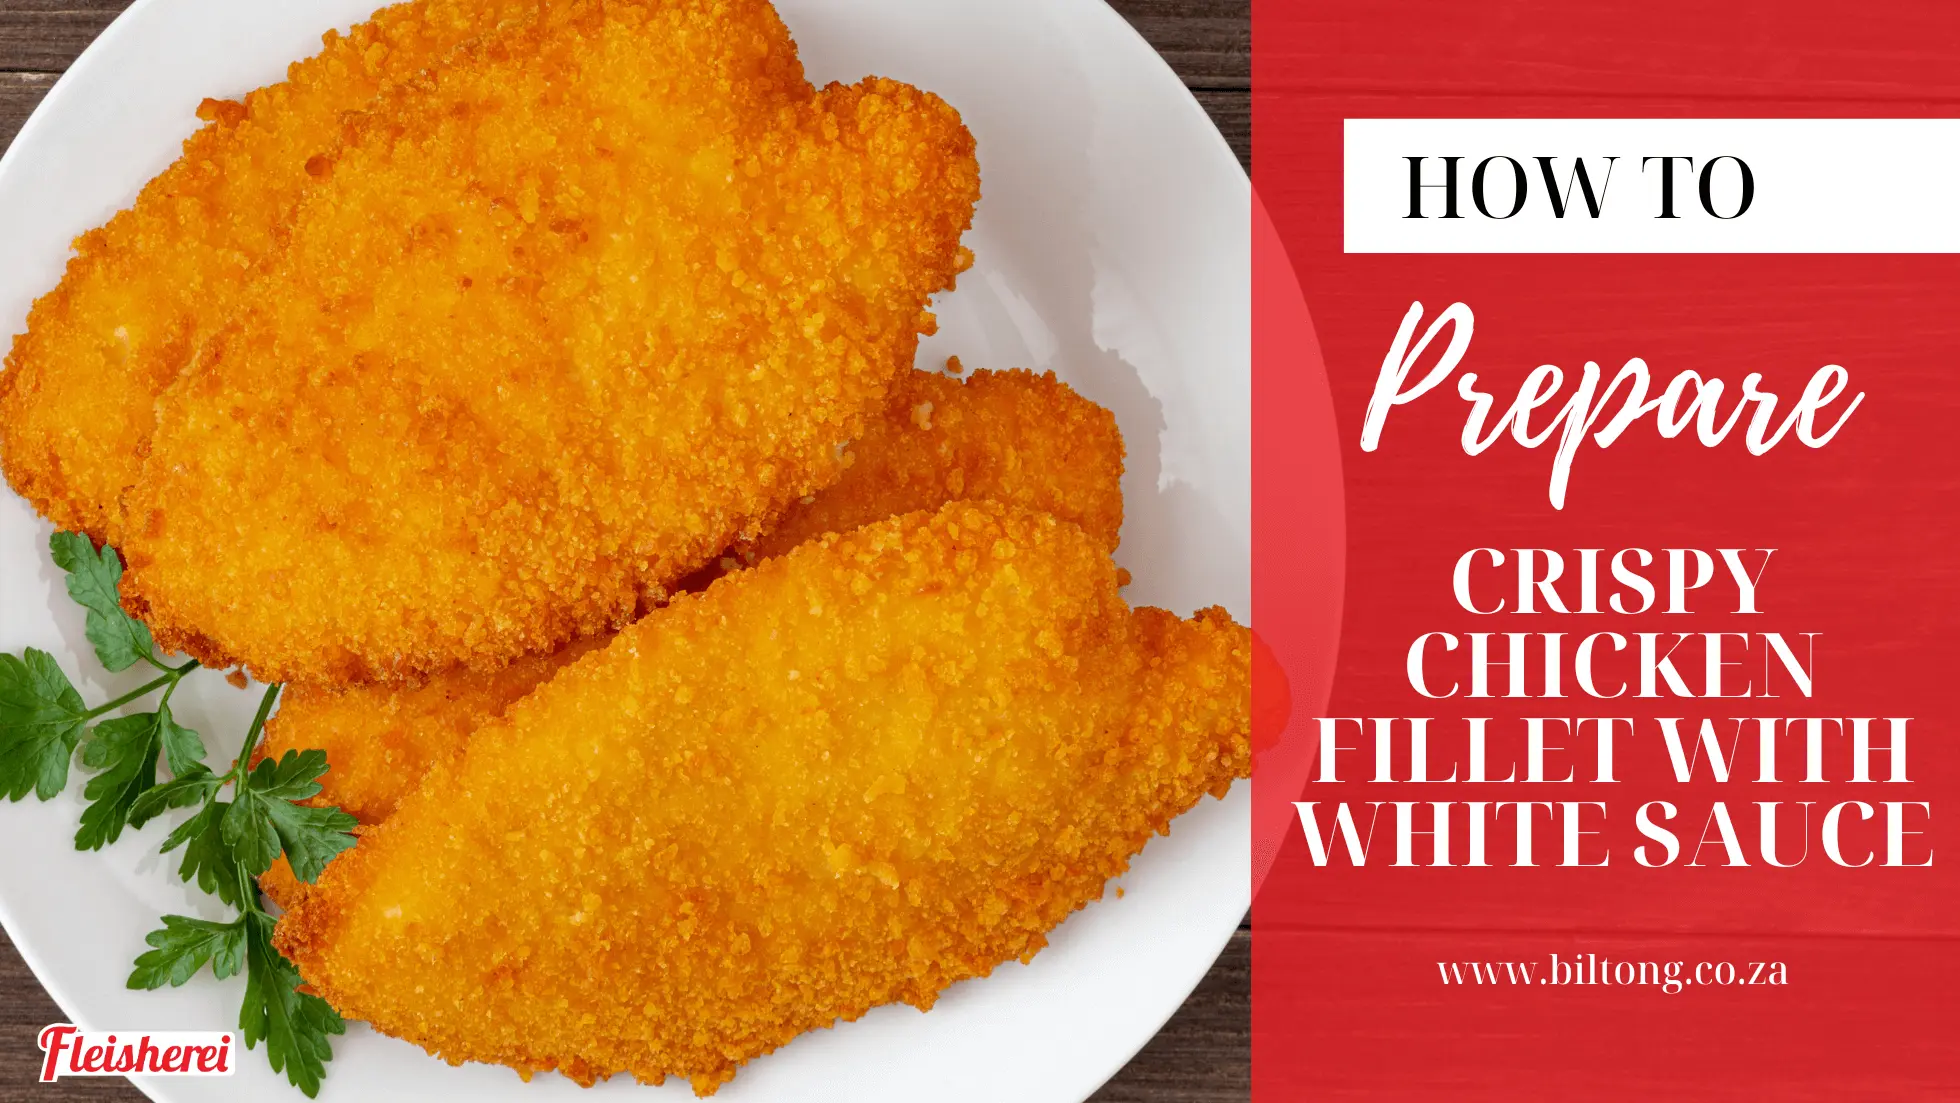 How to prepare crispy chicken fillet with white sauce.